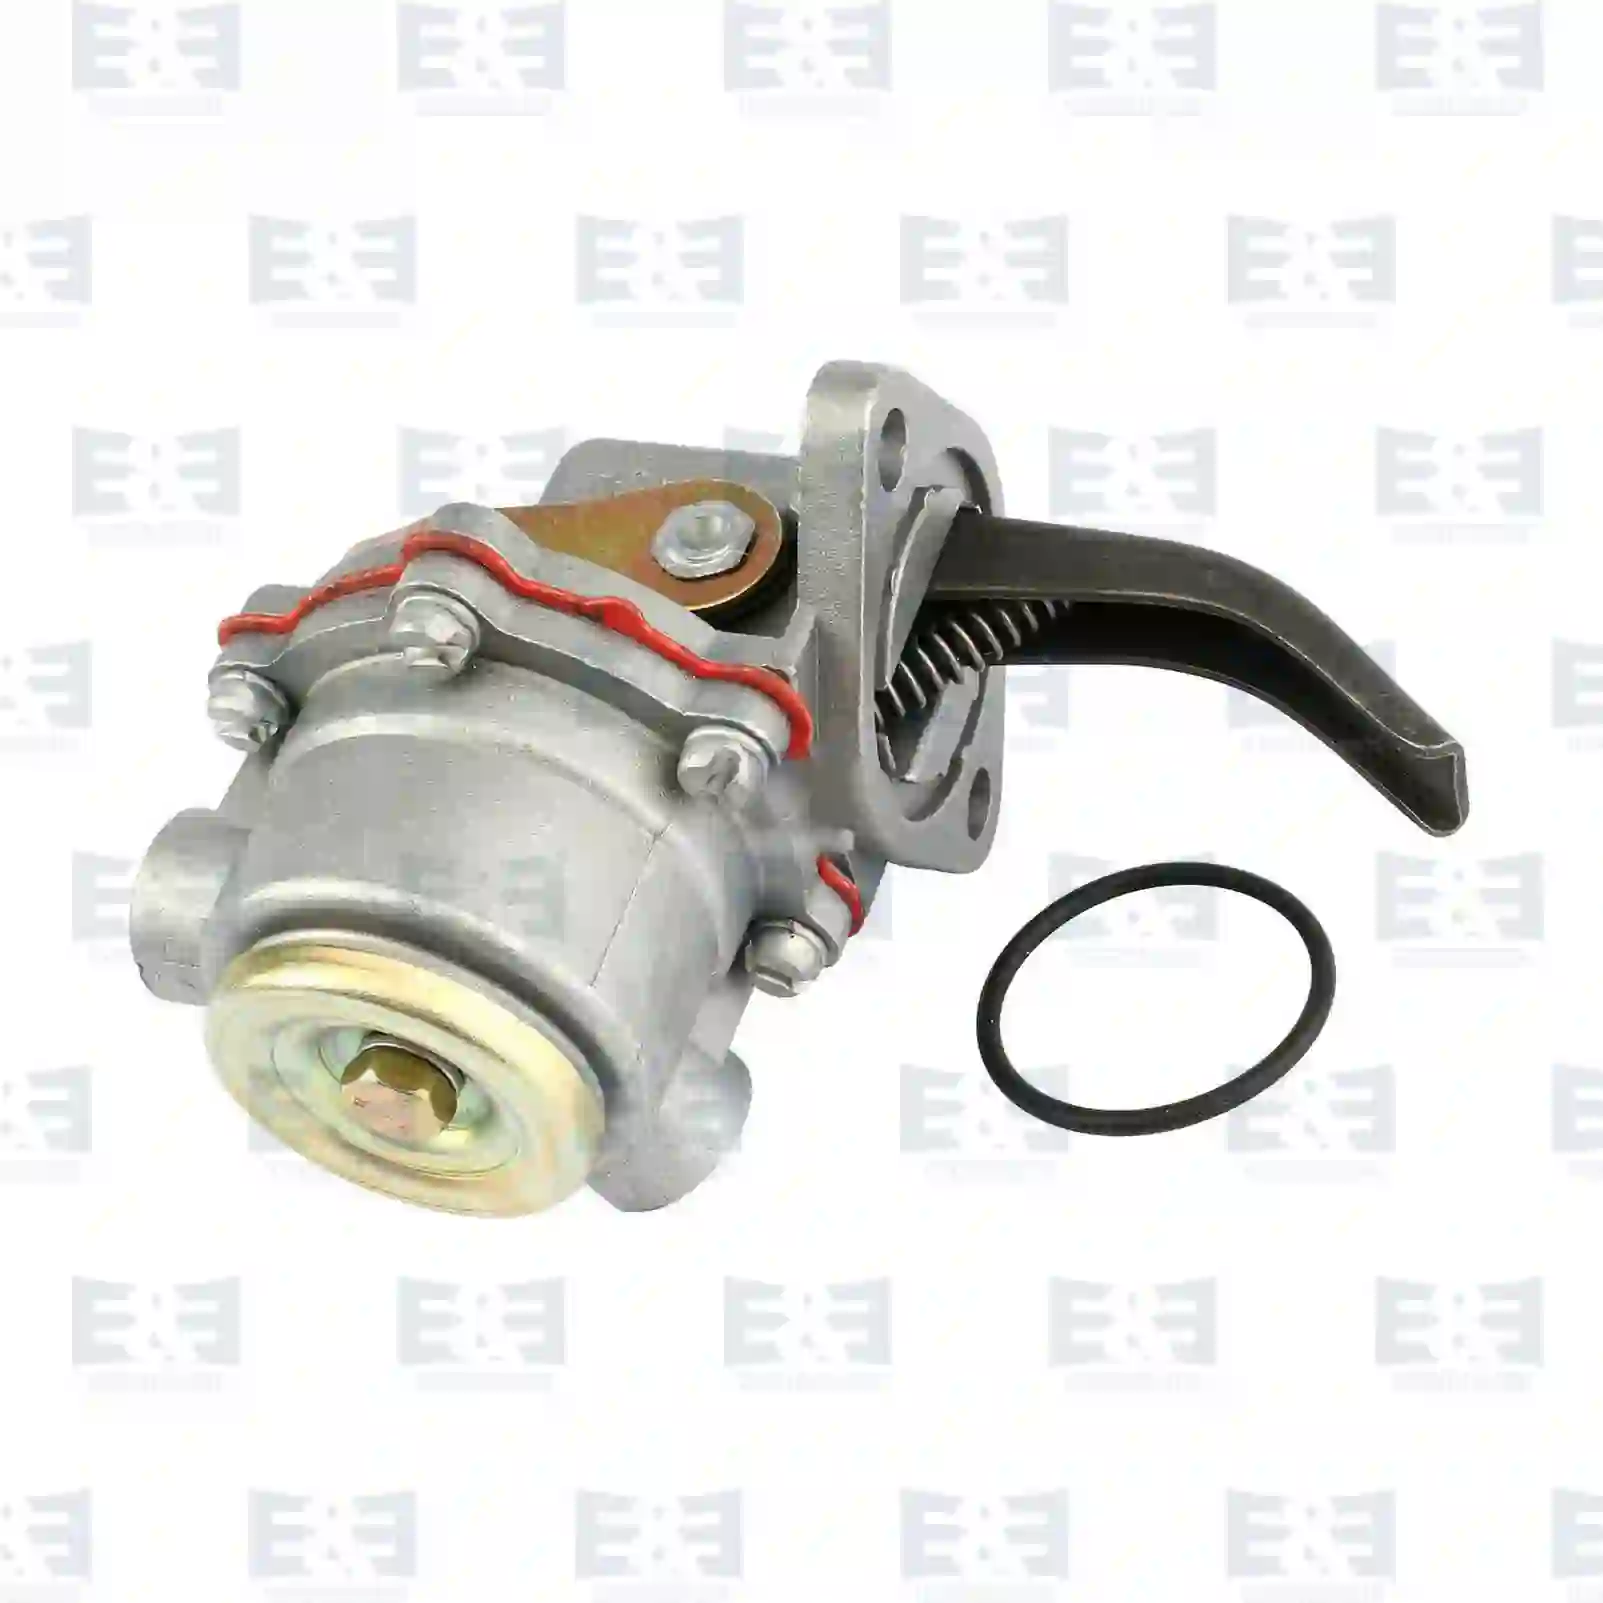 Feed pump, with screw connection, 2E2287888, 51121017047, 51121017120, 51121017136 ||  2E2287888 E&E Truck Spare Parts | Truck Spare Parts, Auotomotive Spare Parts Feed pump, with screw connection, 2E2287888, 51121017047, 51121017120, 51121017136 ||  2E2287888 E&E Truck Spare Parts | Truck Spare Parts, Auotomotive Spare Parts